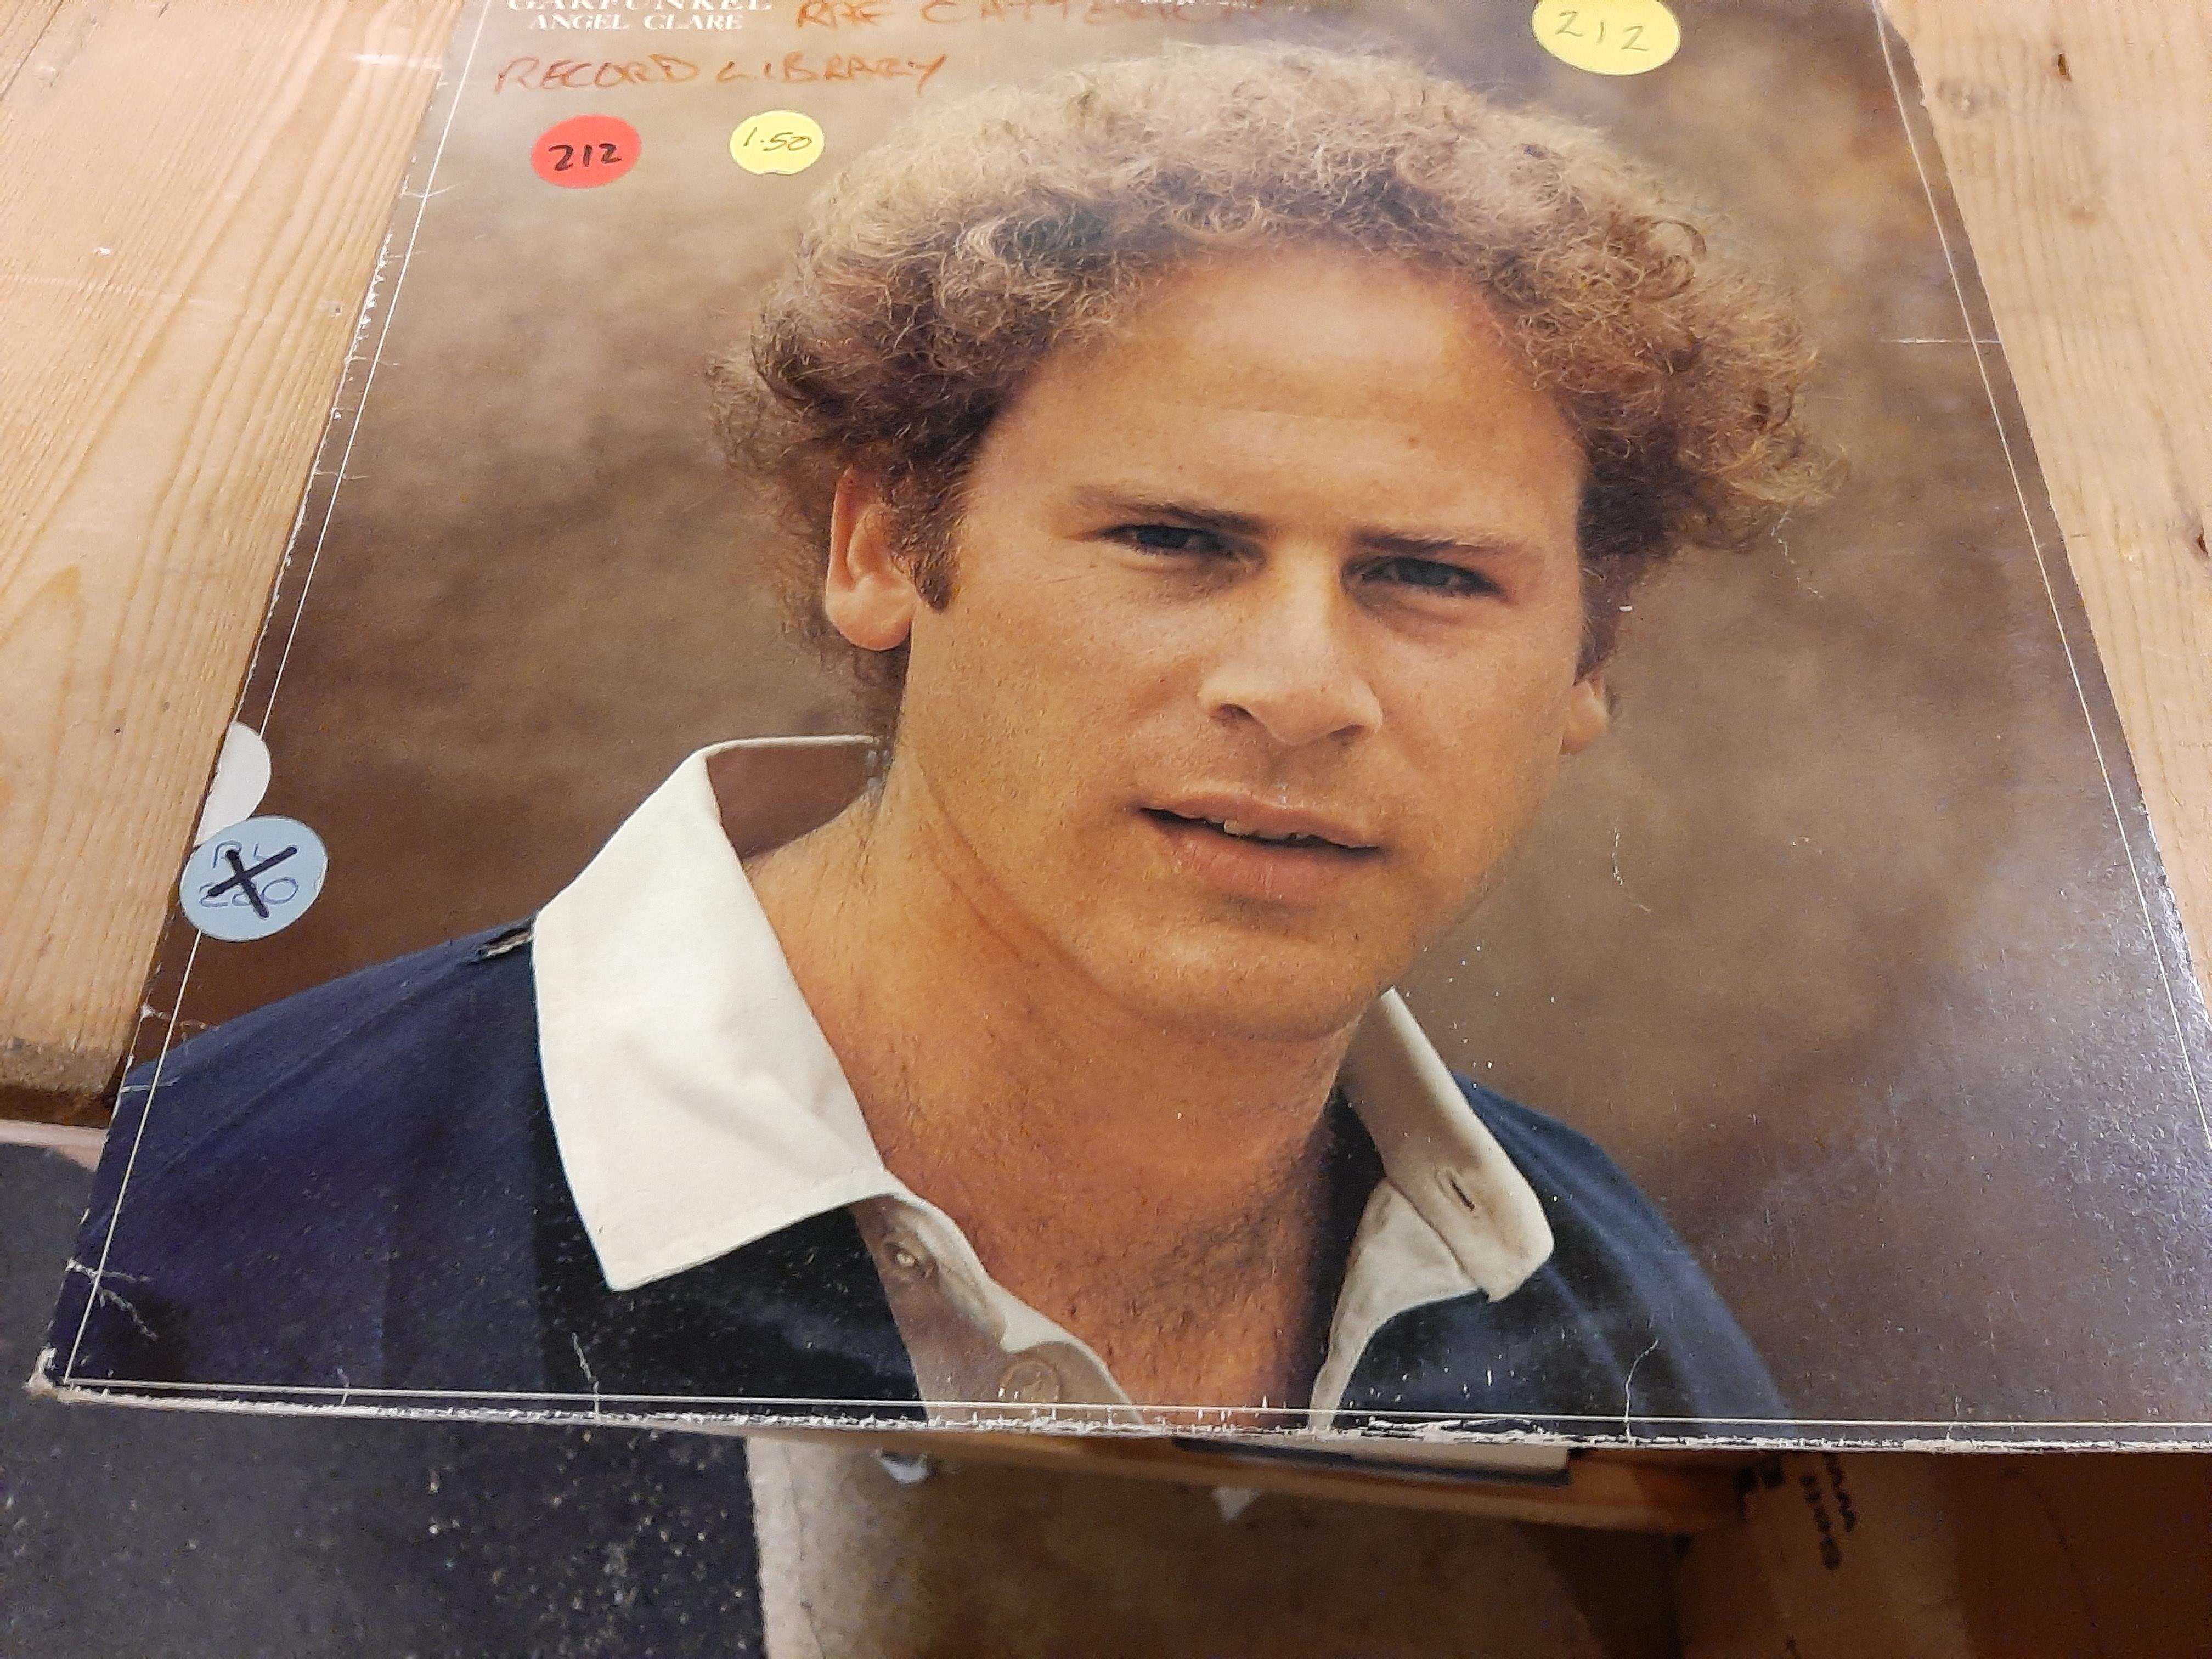 4 Vinyl Records: Simon & Garfunkel "Sounds of Silence" and "Bridge over Troubled Waters", t/w - Image 6 of 7